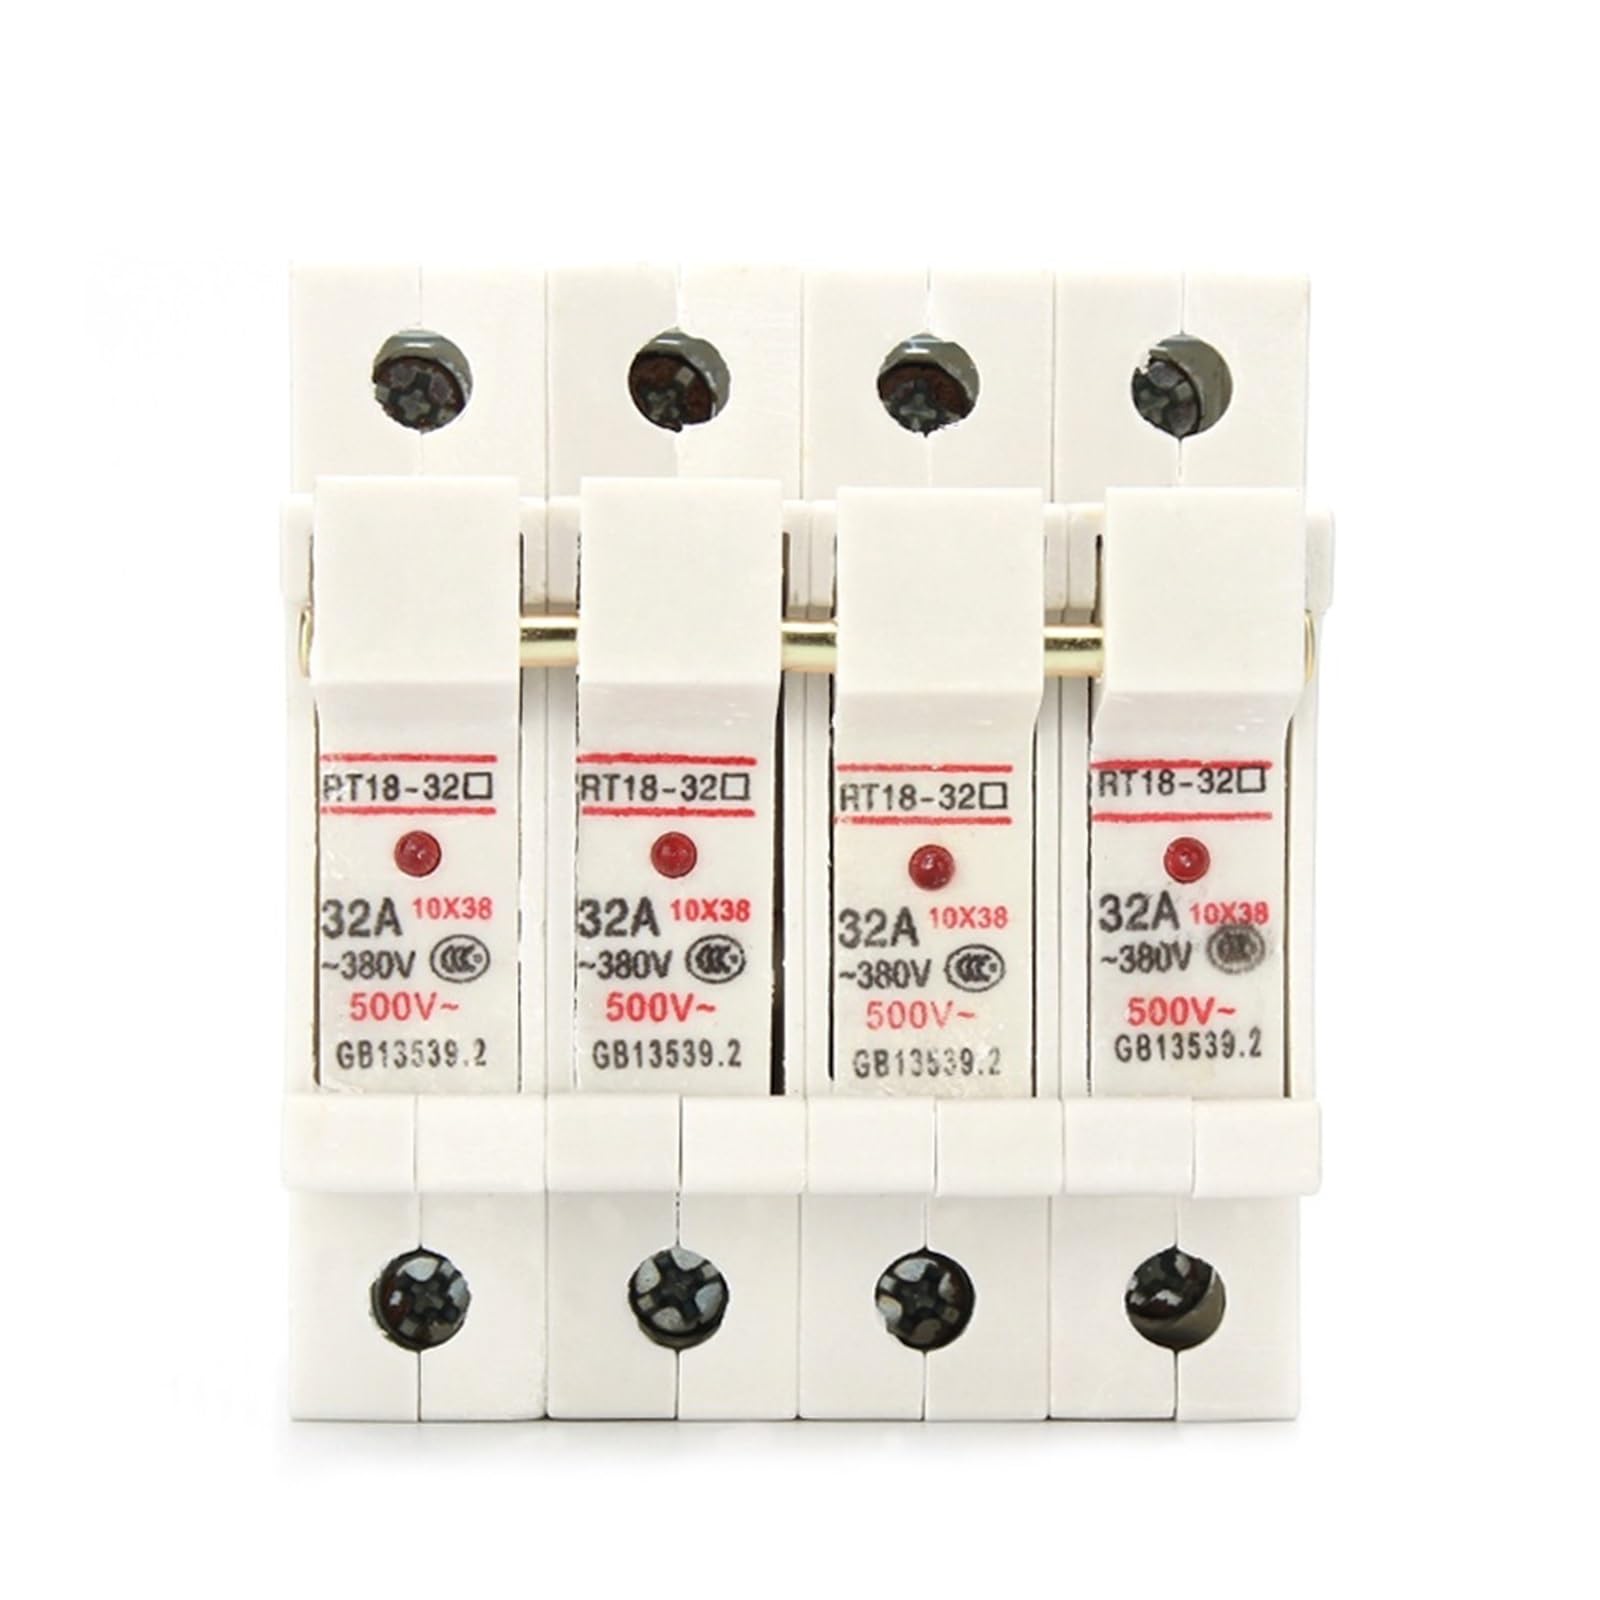 1P 2P 3P 4P RT18-32X AC ~380V Copper Fuse Holder 500V 10x38mm DIN rail mounting Fuse holder bottom adapter with Fuse RUAJOGYNVM(3A,4P) von RUAJOGYNVM